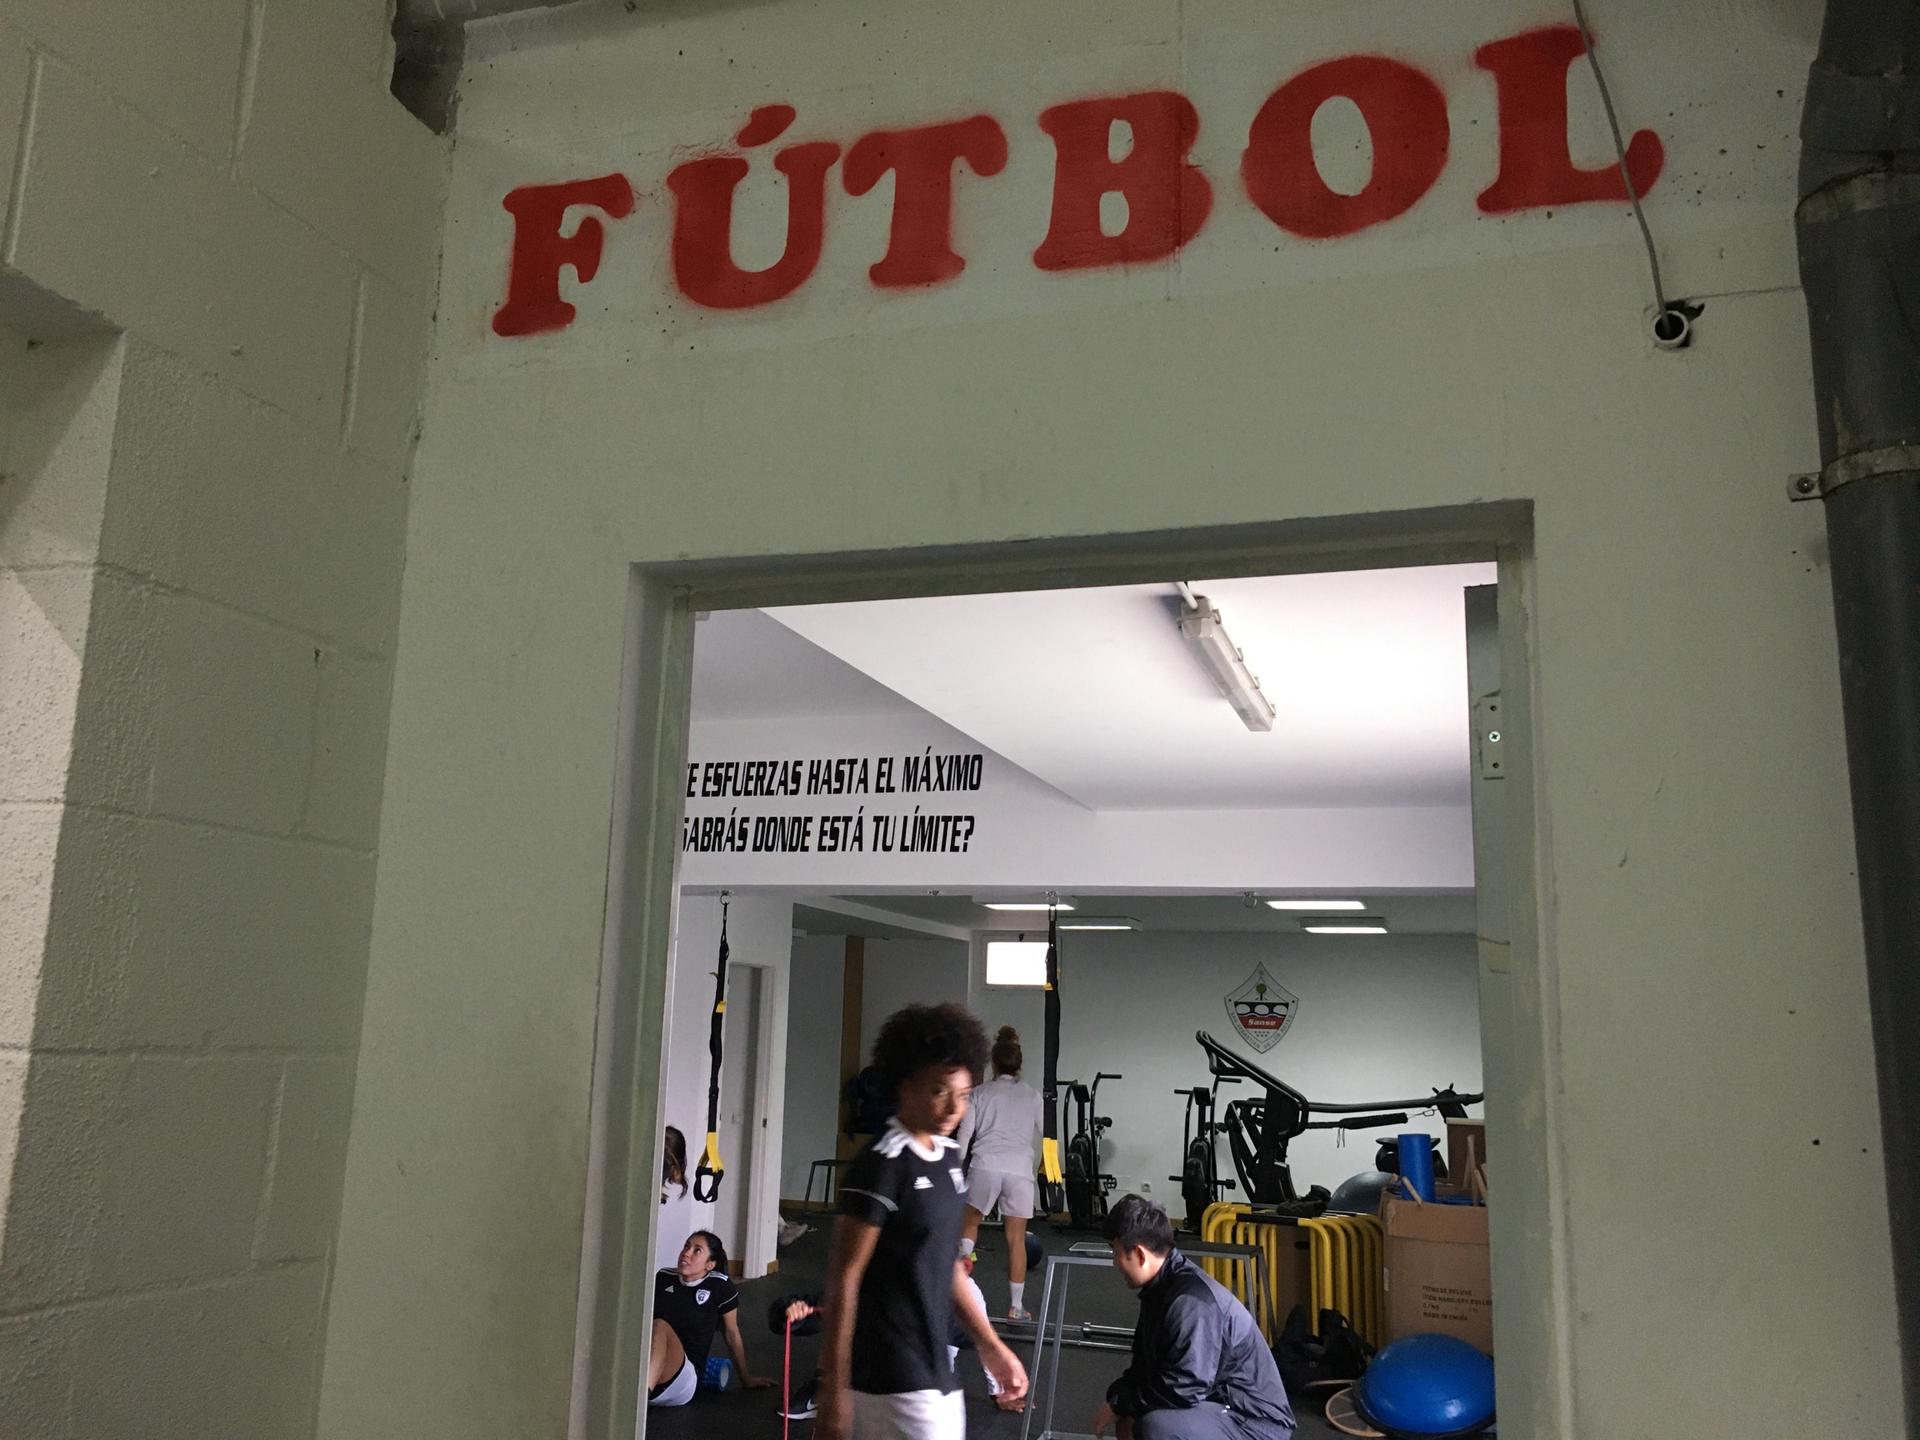 Entrance to gym reads "Futbol" in red letters. 